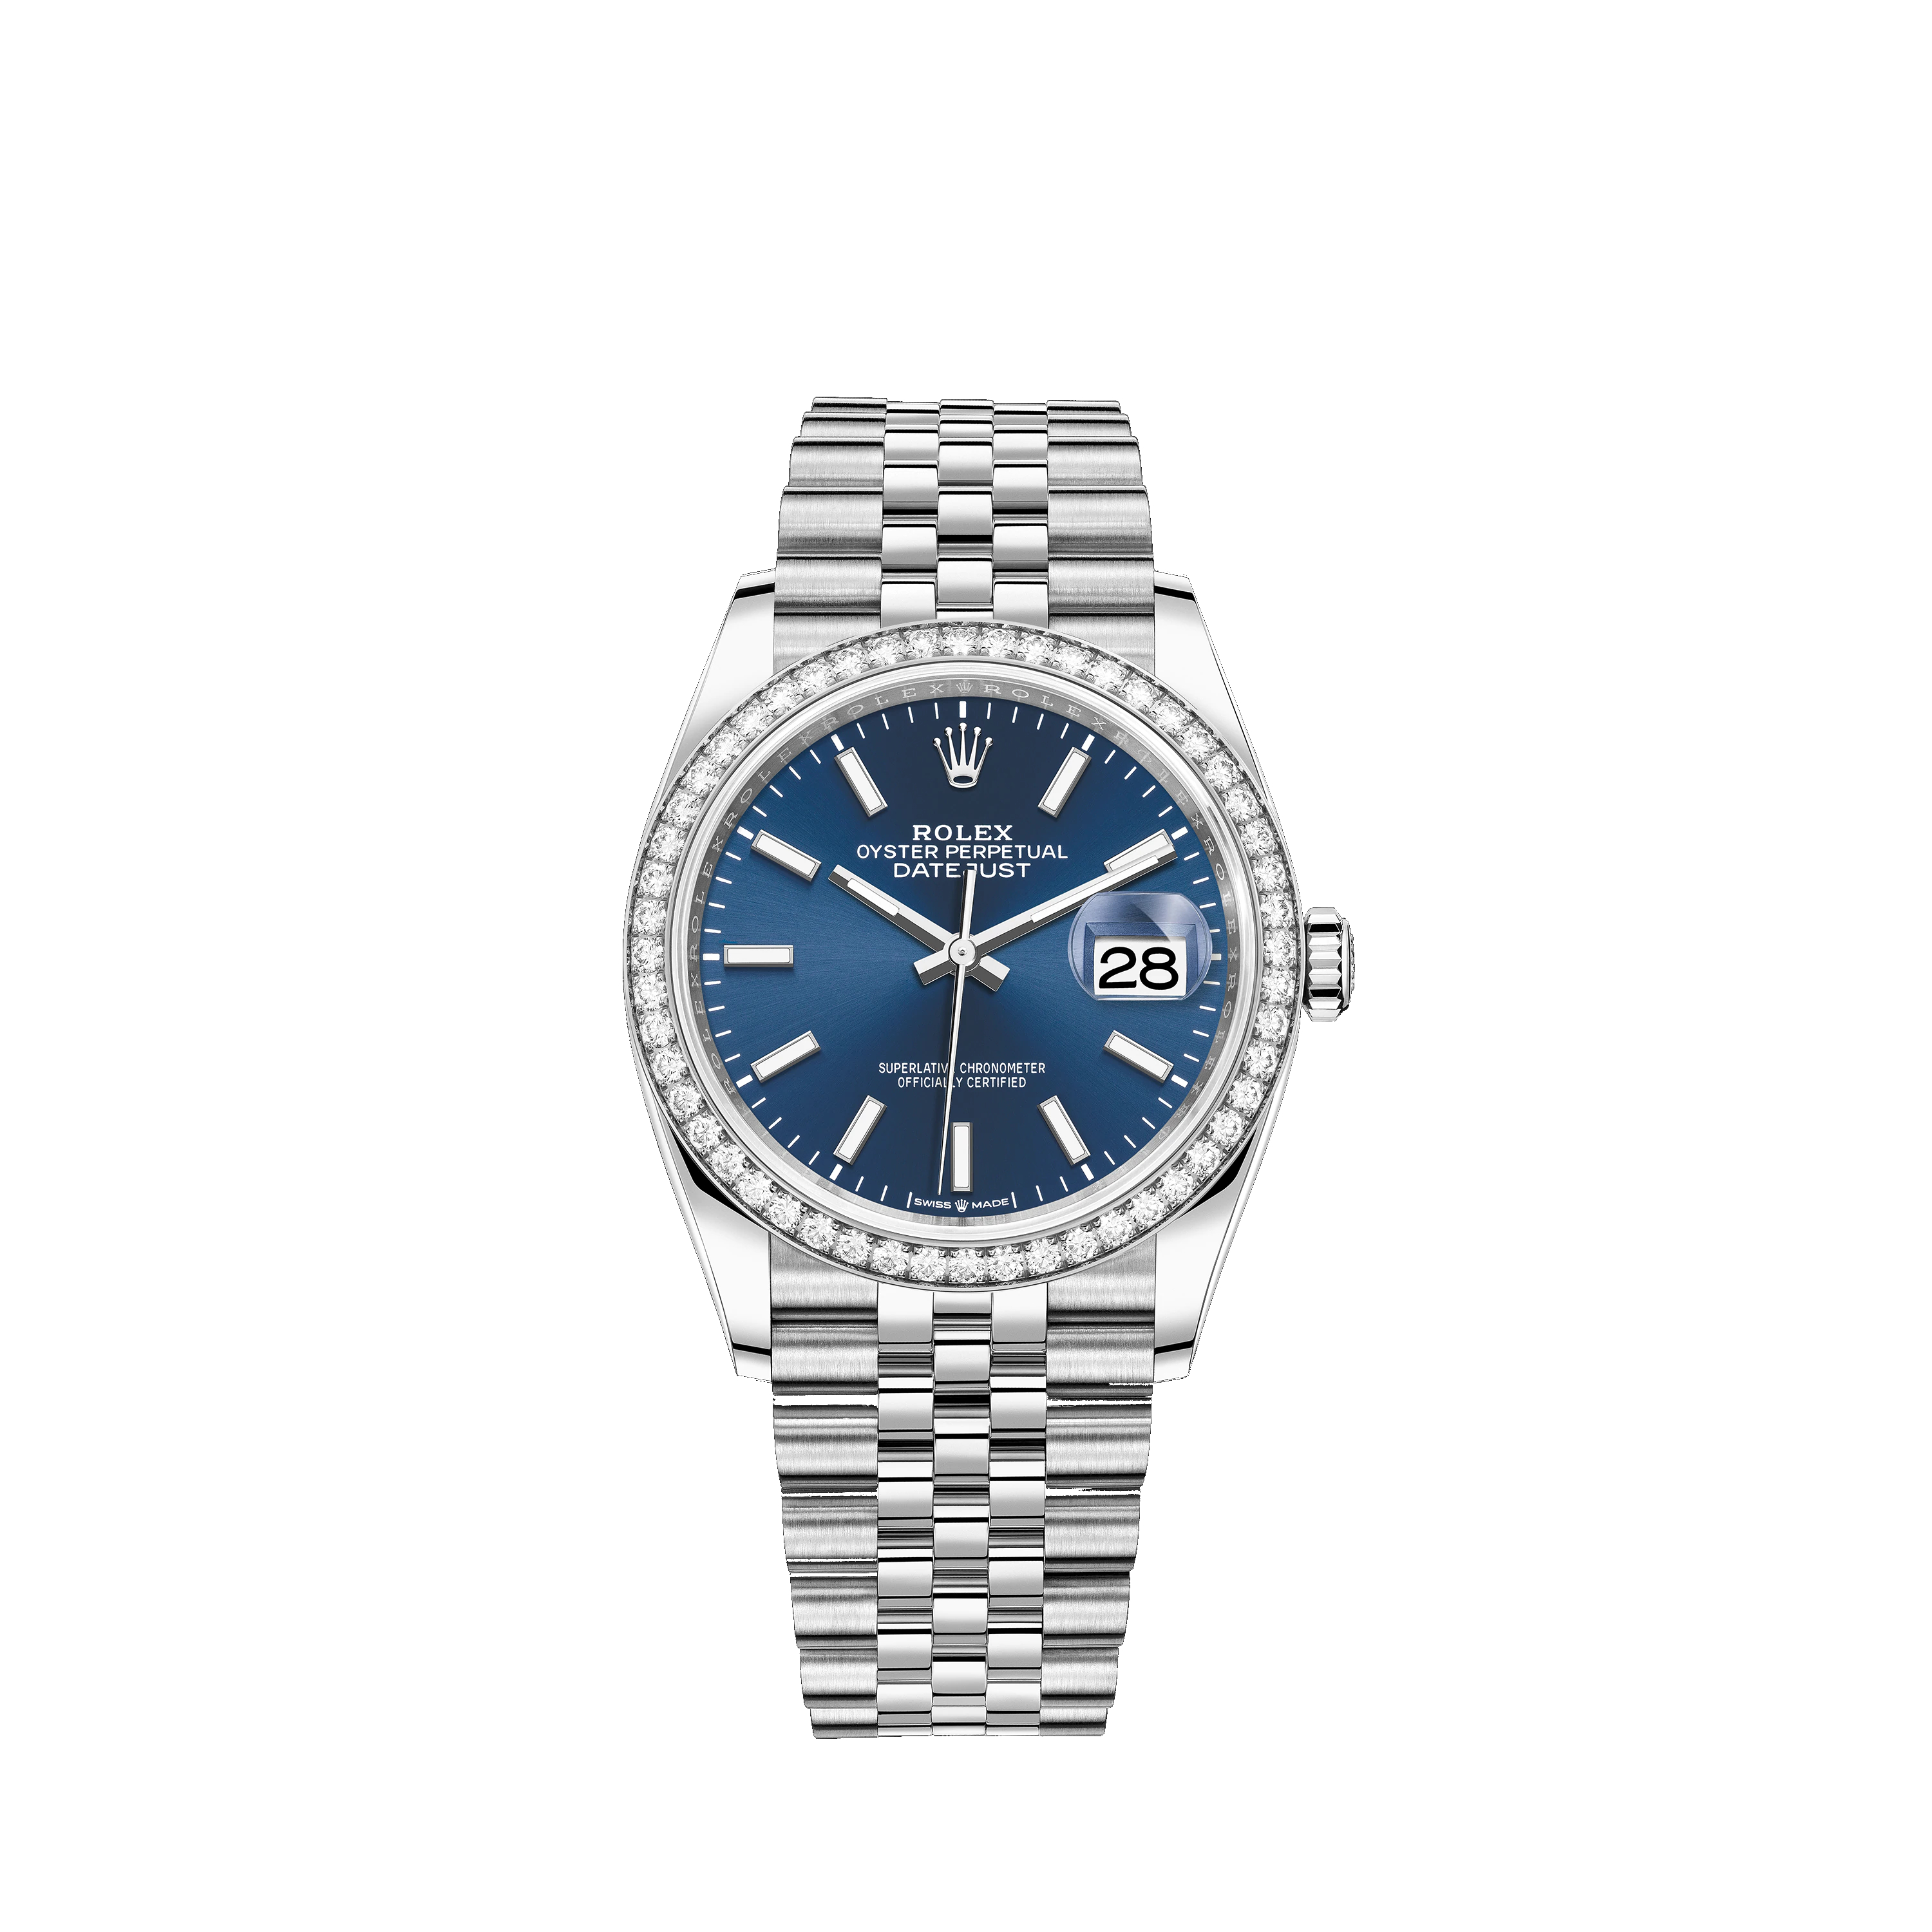 Datejust 36 126284RBR White Gold, Stainless Steel & Diamonds Watch (Blue)